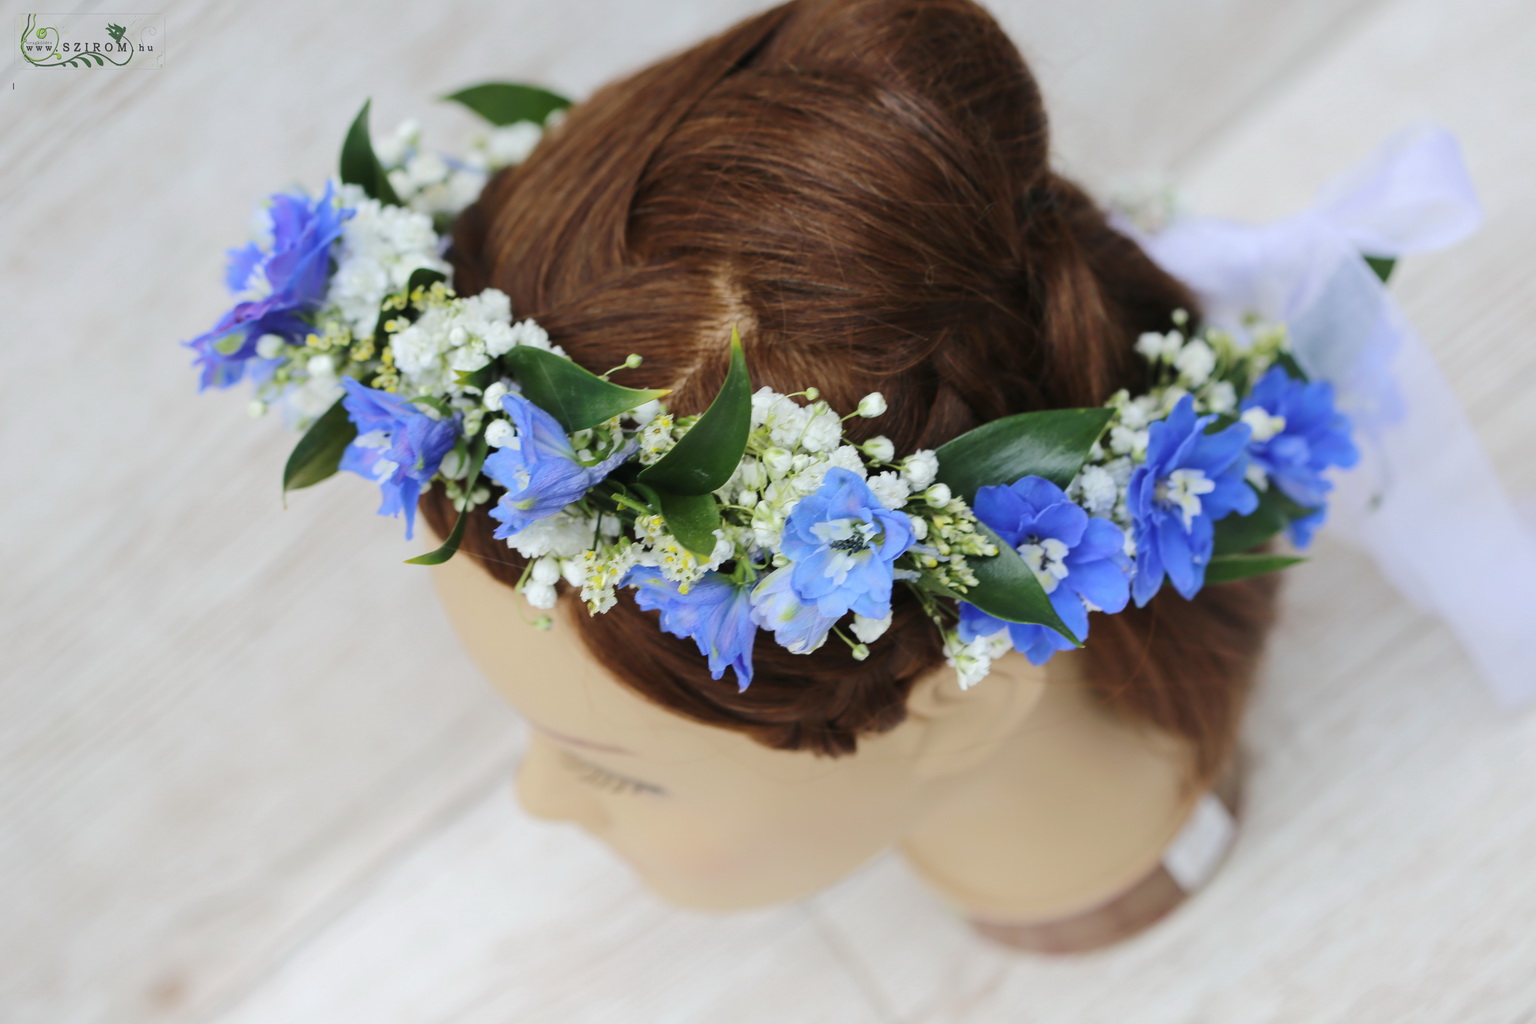 flower delivery Budapest - Hair wreath with blue delphiniums, baby's breath